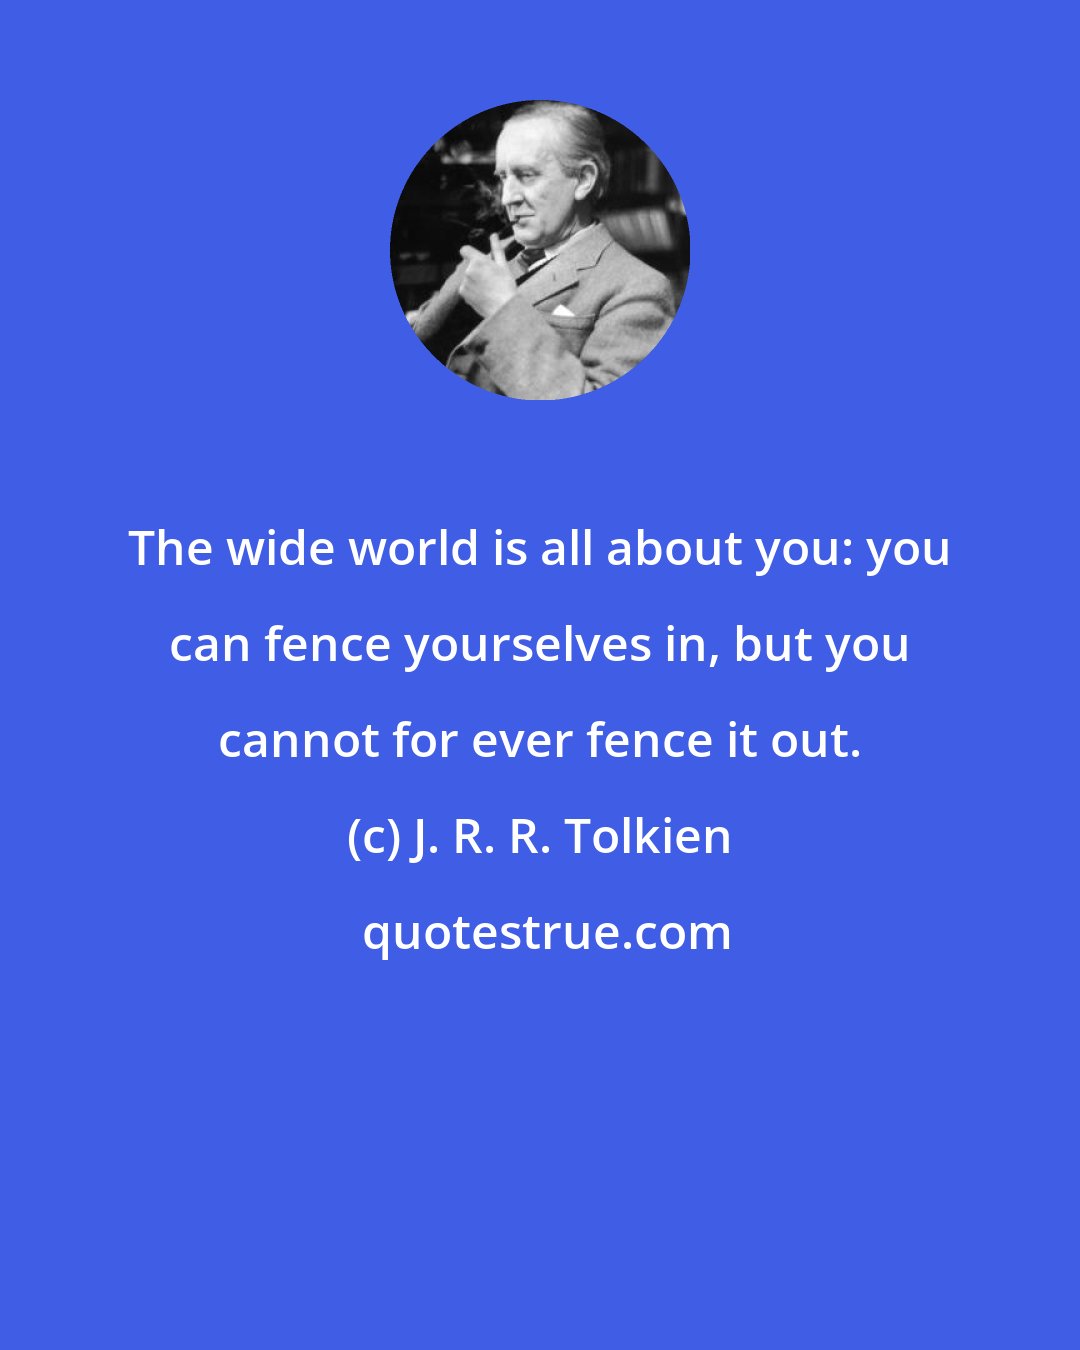 J. R. R. Tolkien: The wide world is all about you: you can fence yourselves in, but you cannot for ever fence it out.